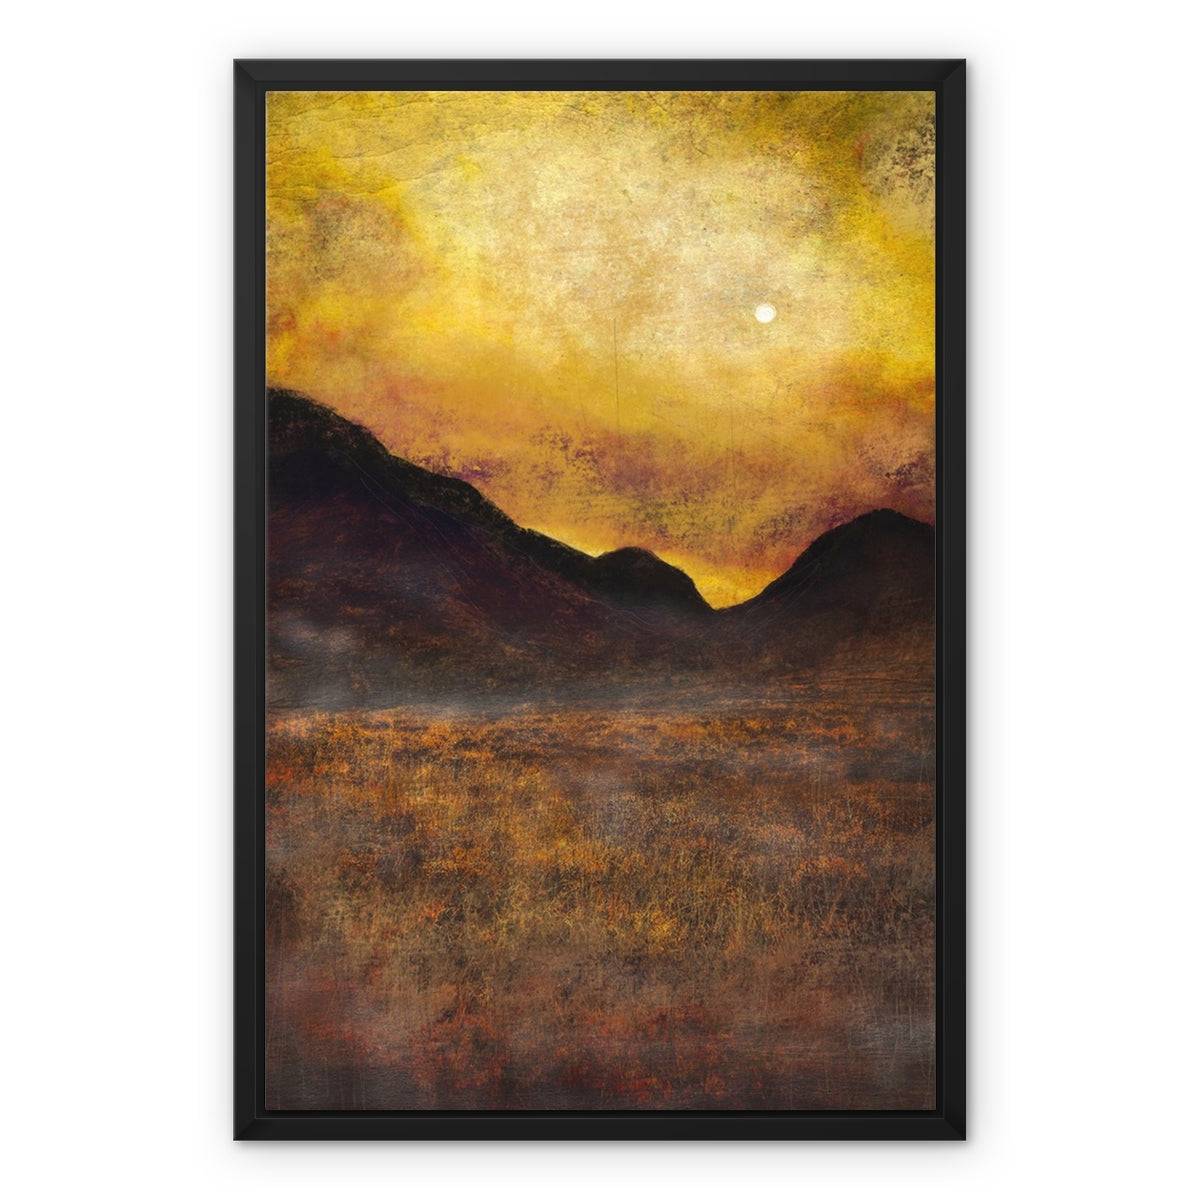 Glencoe Moonlight Painting | Framed Canvas From Scotland-Floating Framed Canvas Prints-Glencoe Art Gallery-18"x24"-Black Frame-Paintings, Prints, Homeware, Art Gifts From Scotland By Scottish Artist Kevin Hunter